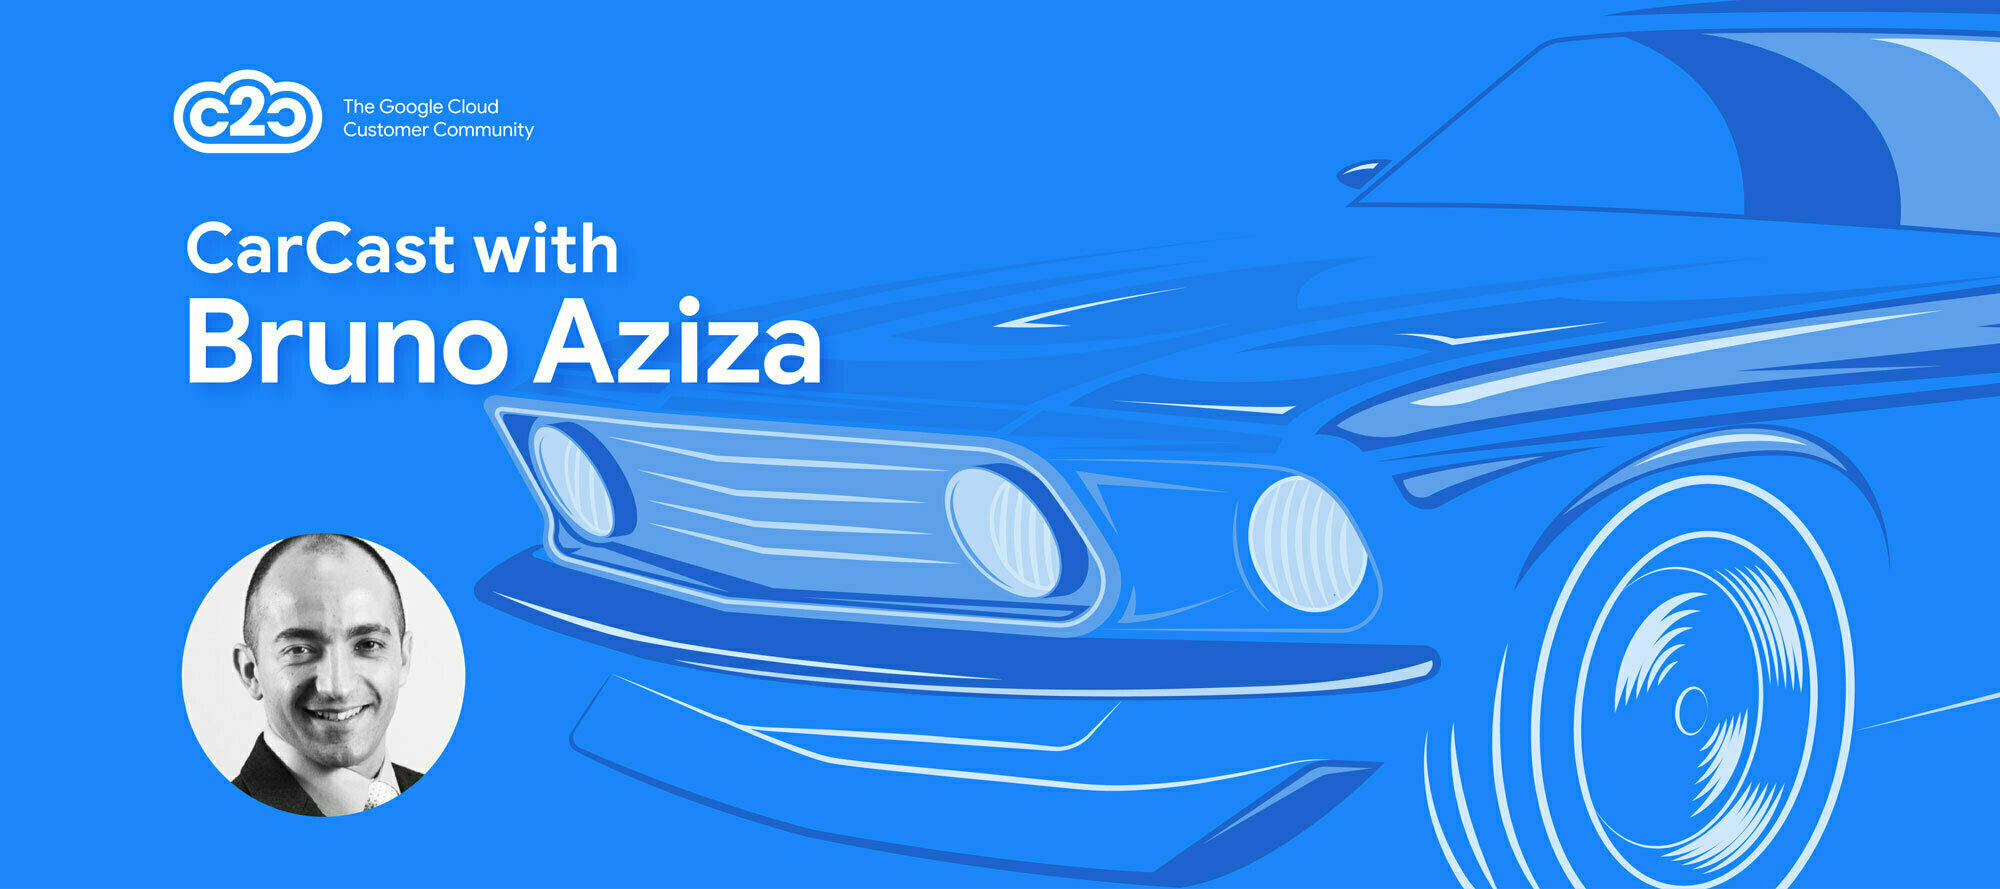 CarCast with Bruno Aziza: Consumer and enterprise platforms you should be paying attention to.